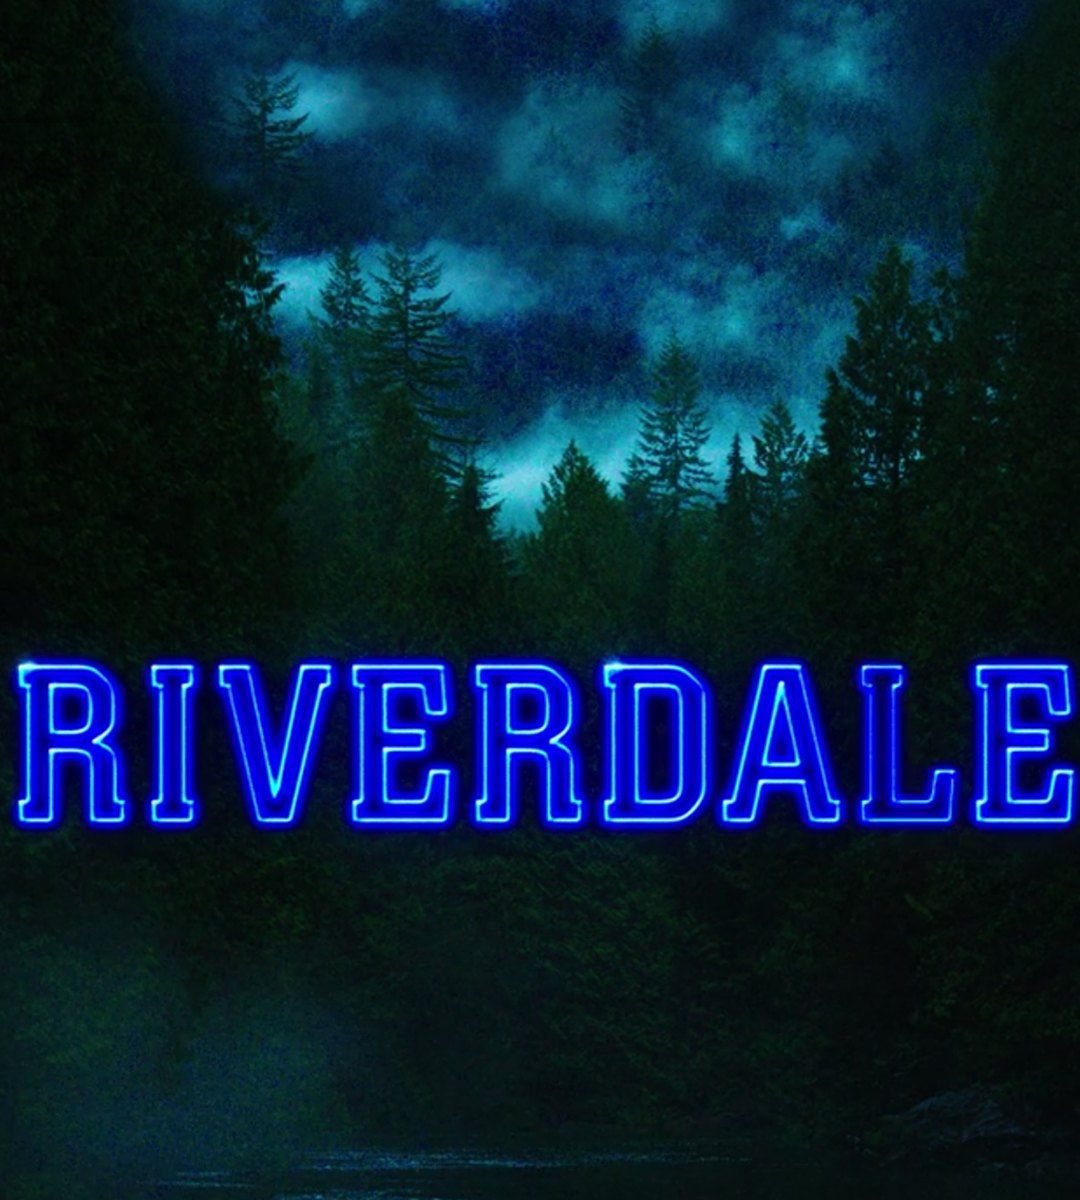 Riverdale Wallpaper: Cute Character Graphics for Your Phone